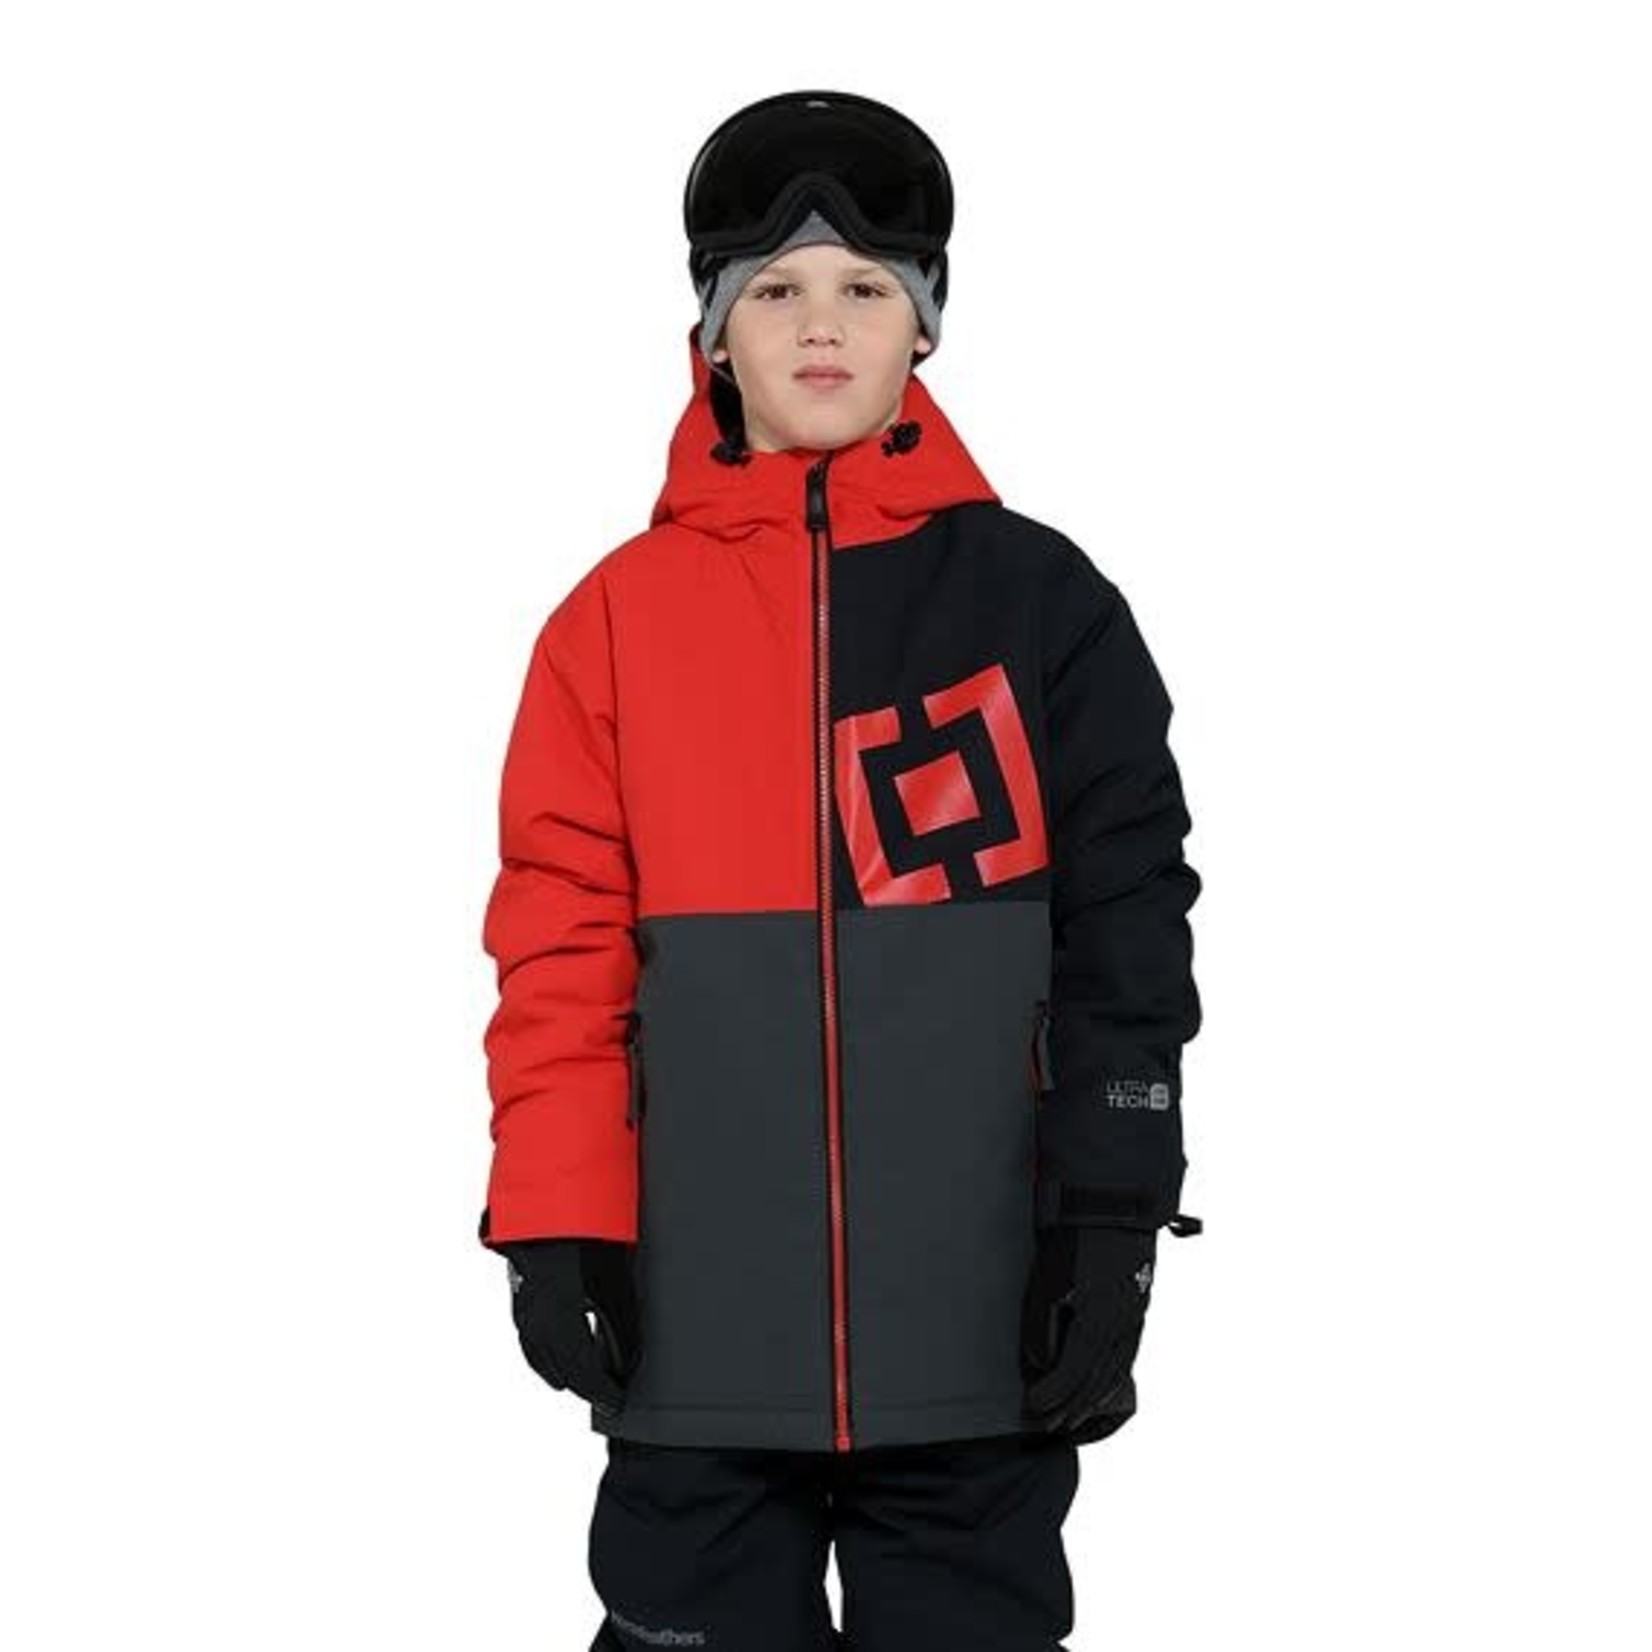 Horsefeathers DAMIEN YOUTH JACKET (lava red) - Veste snow - HORSEFEATHERS